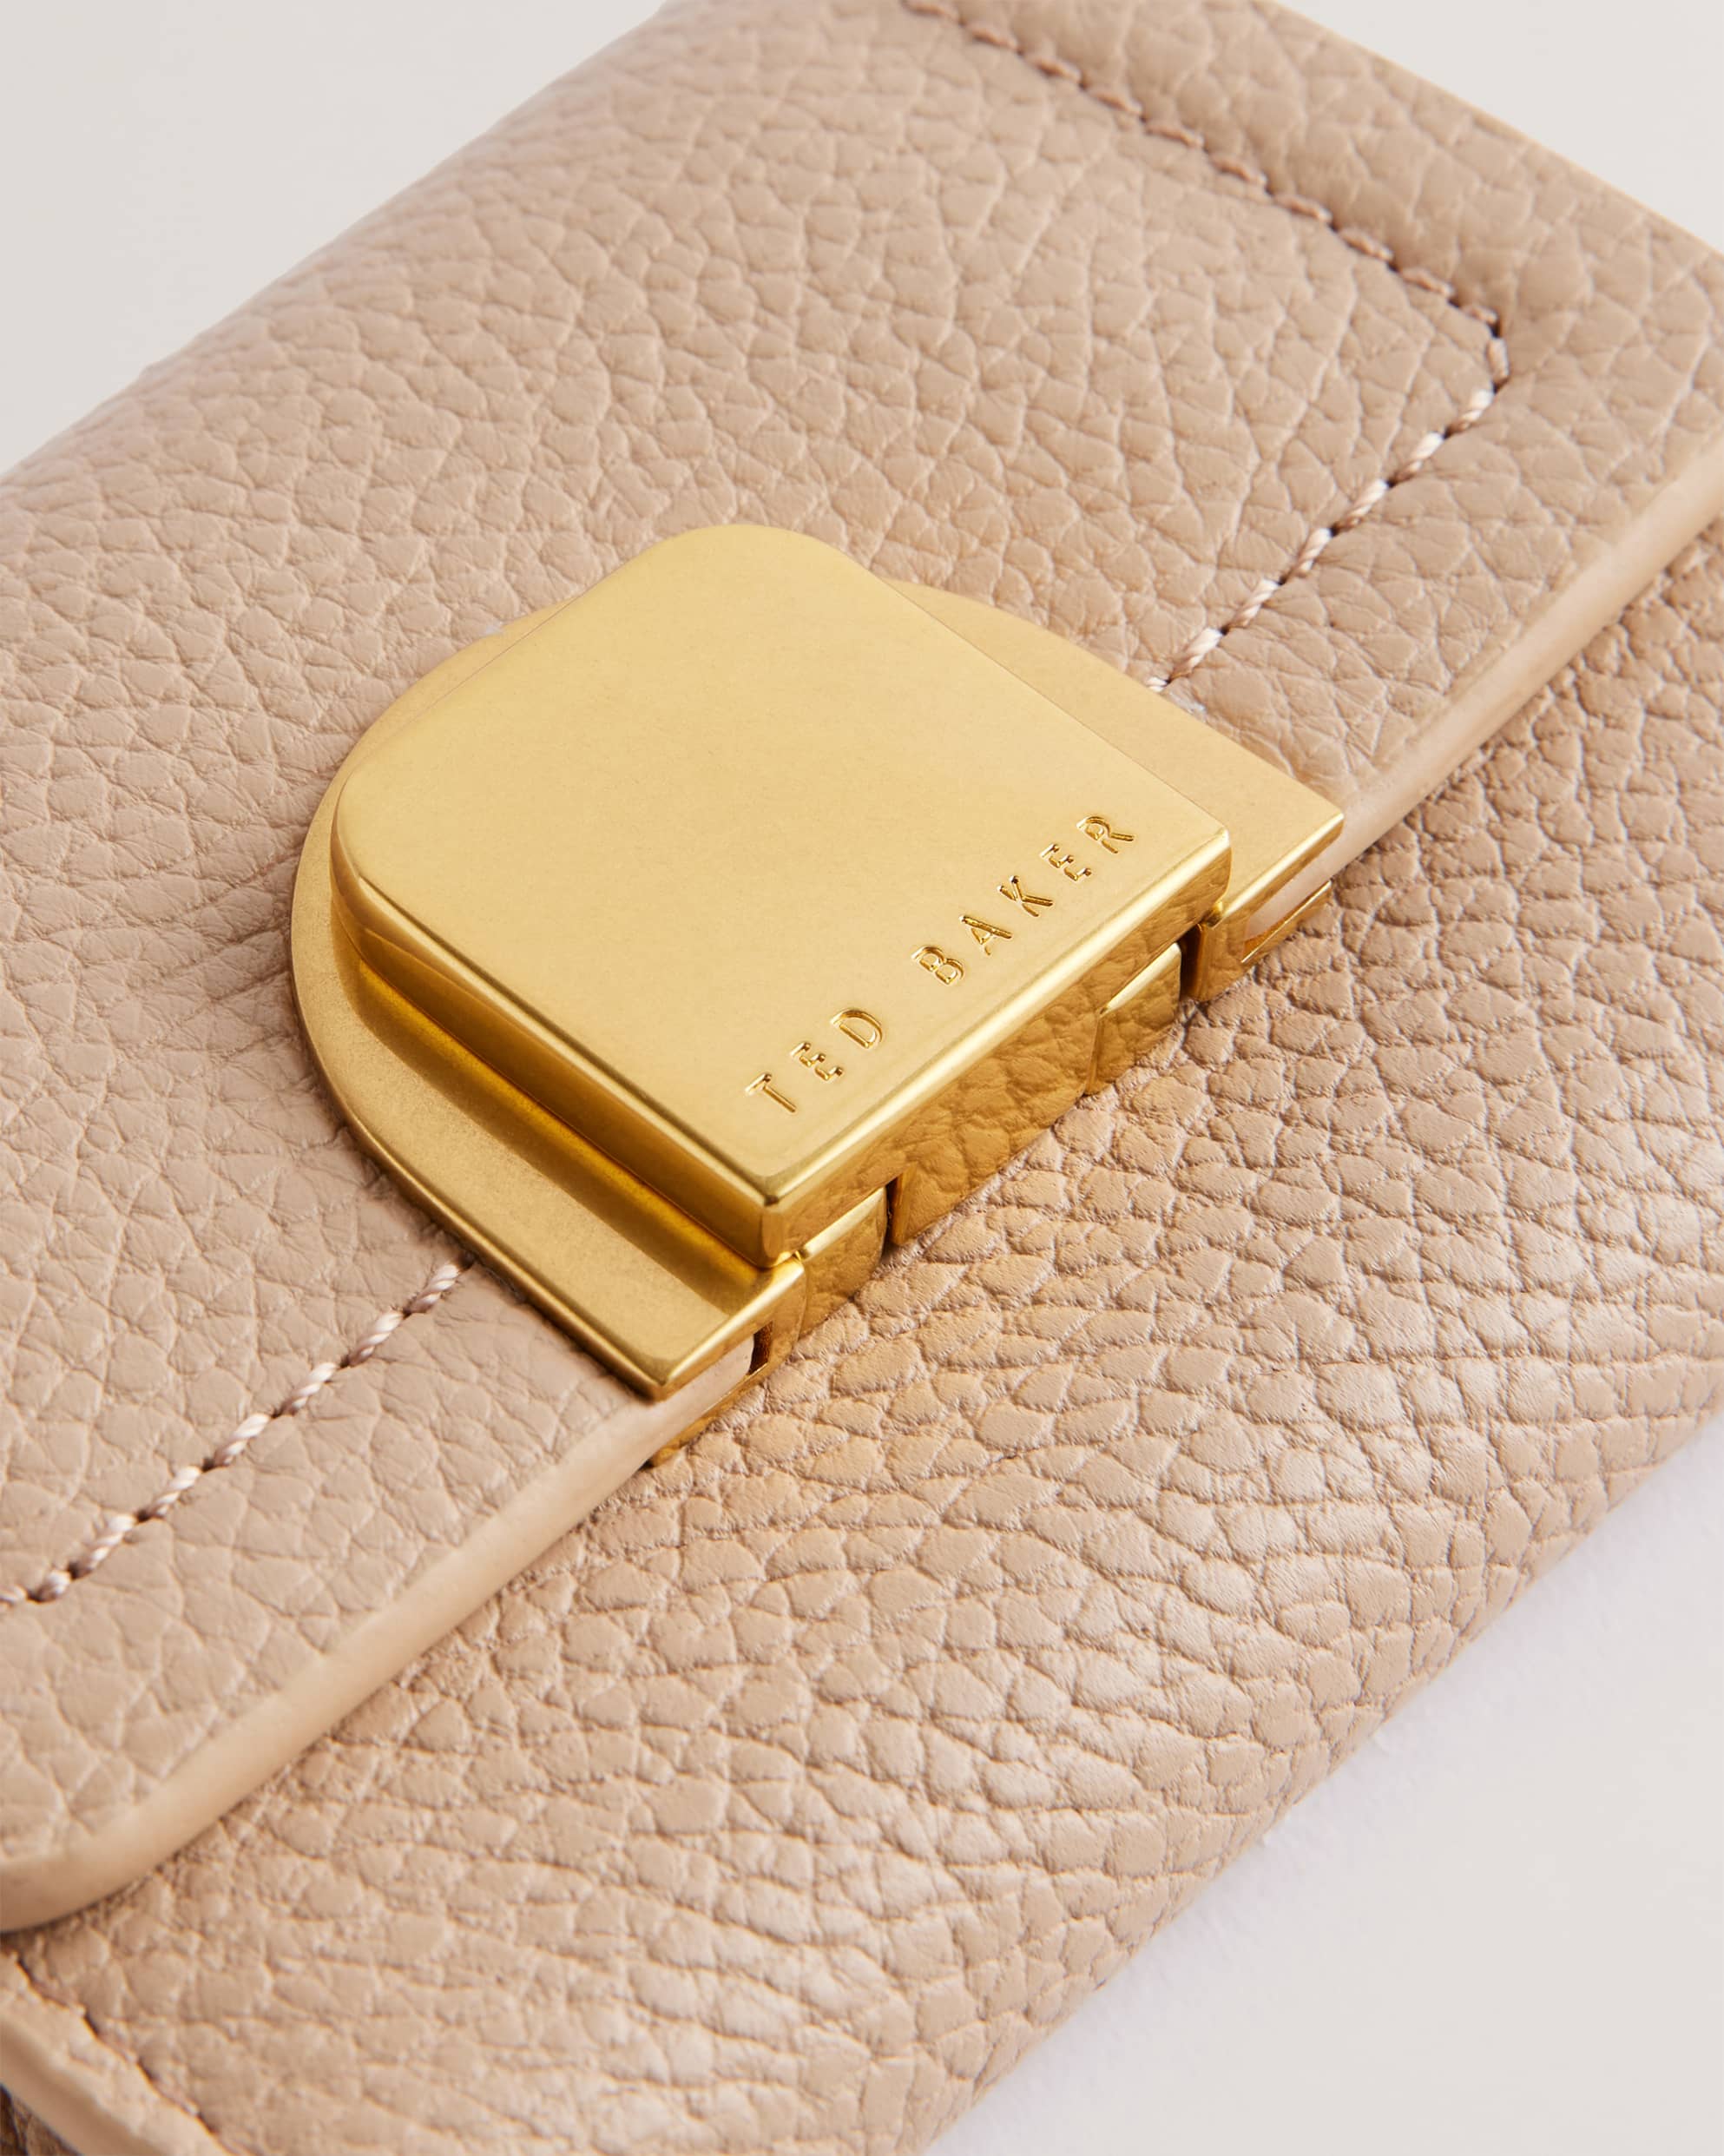 Imperia Lock Detail Small Leather Purse Taupe